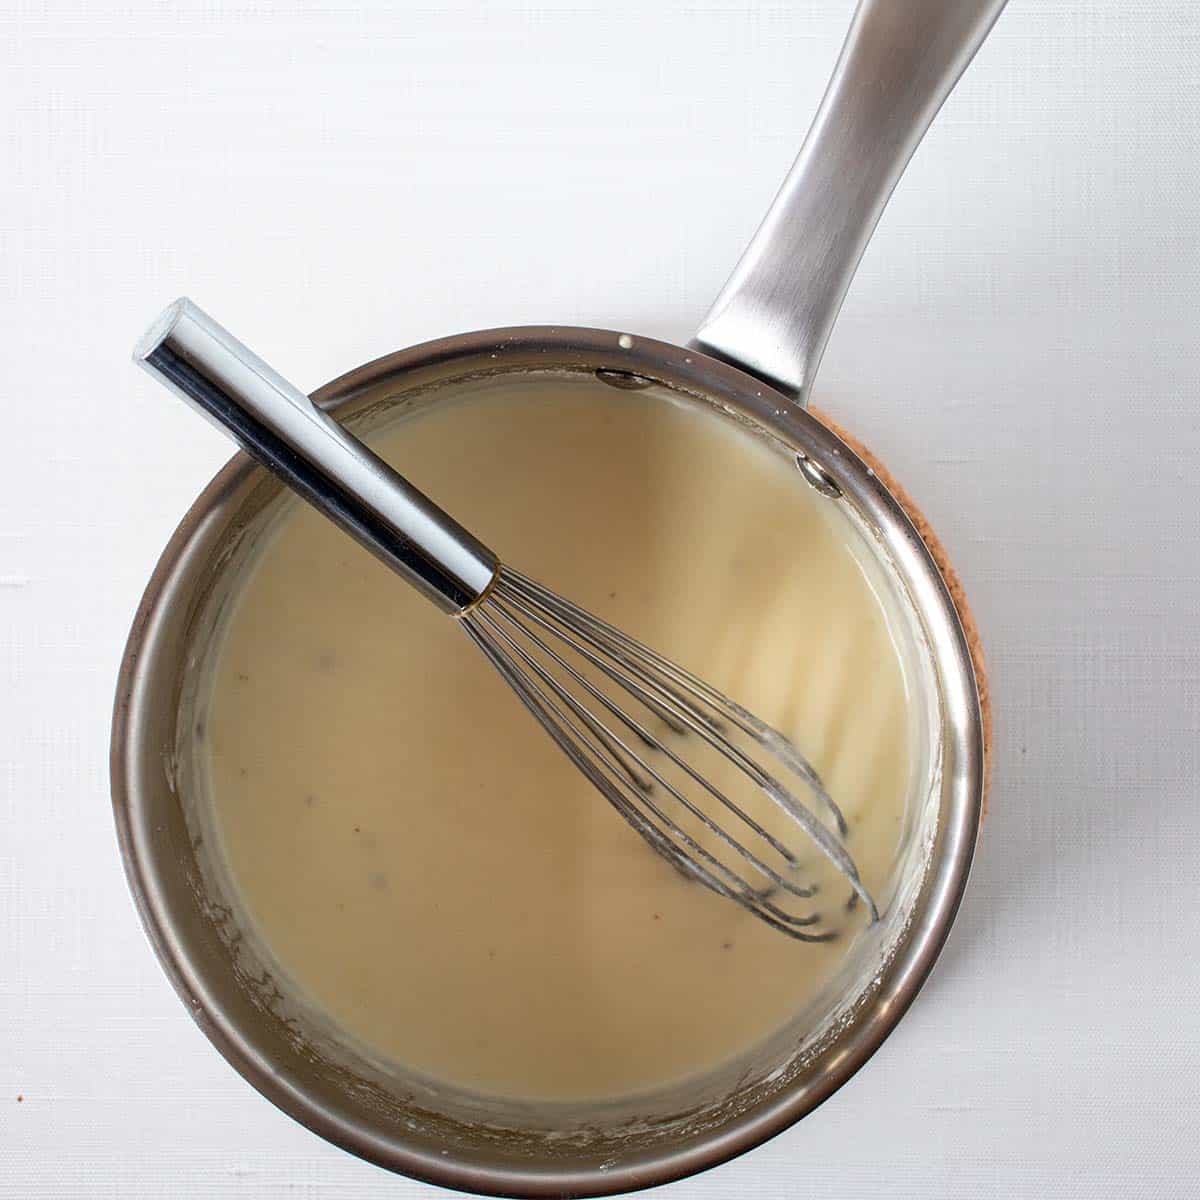 greek yogurt and half & half cream added to butter mixture and whisked together in saucepan.